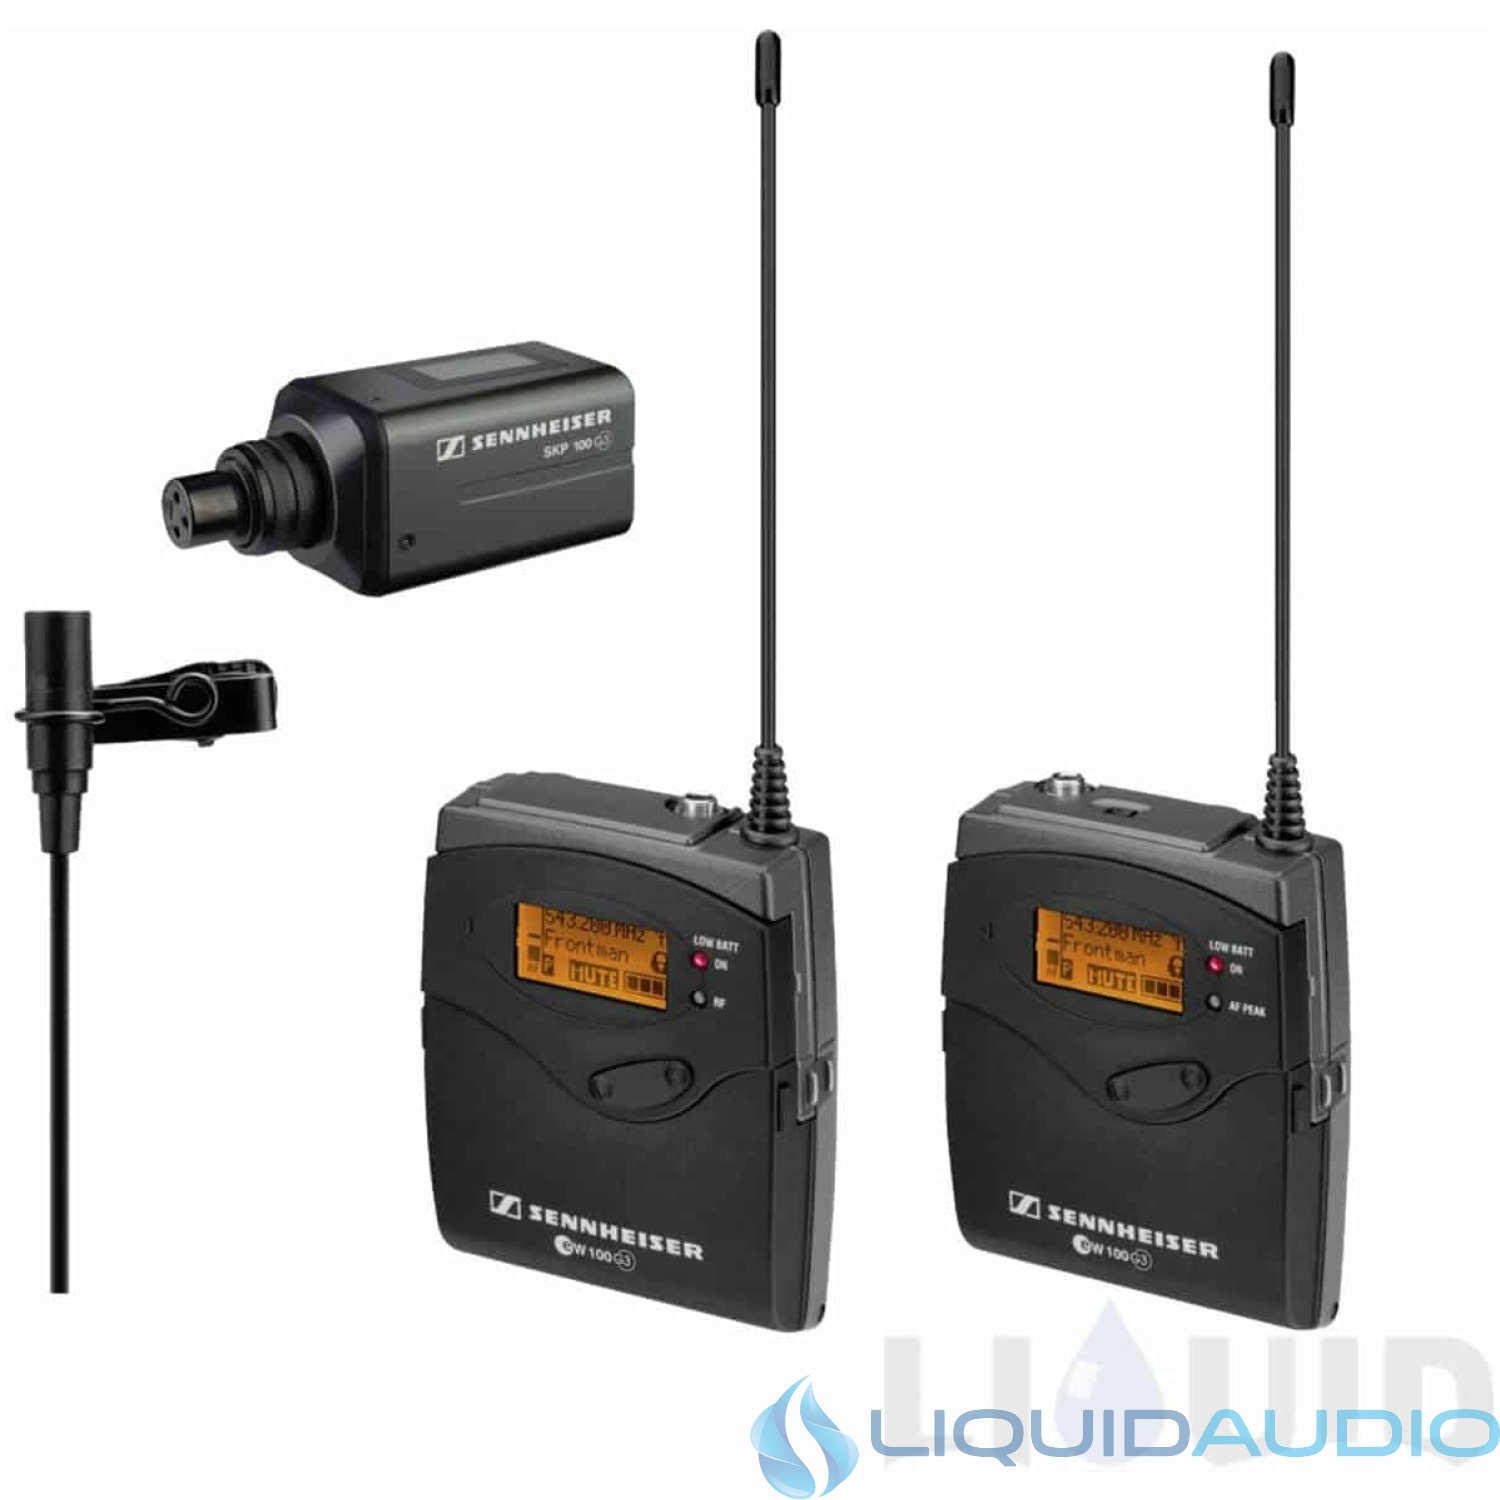 Sennheiser EW 100 ENG G3-B omni-directional clip-on microphone kit system 2-Day Delivery